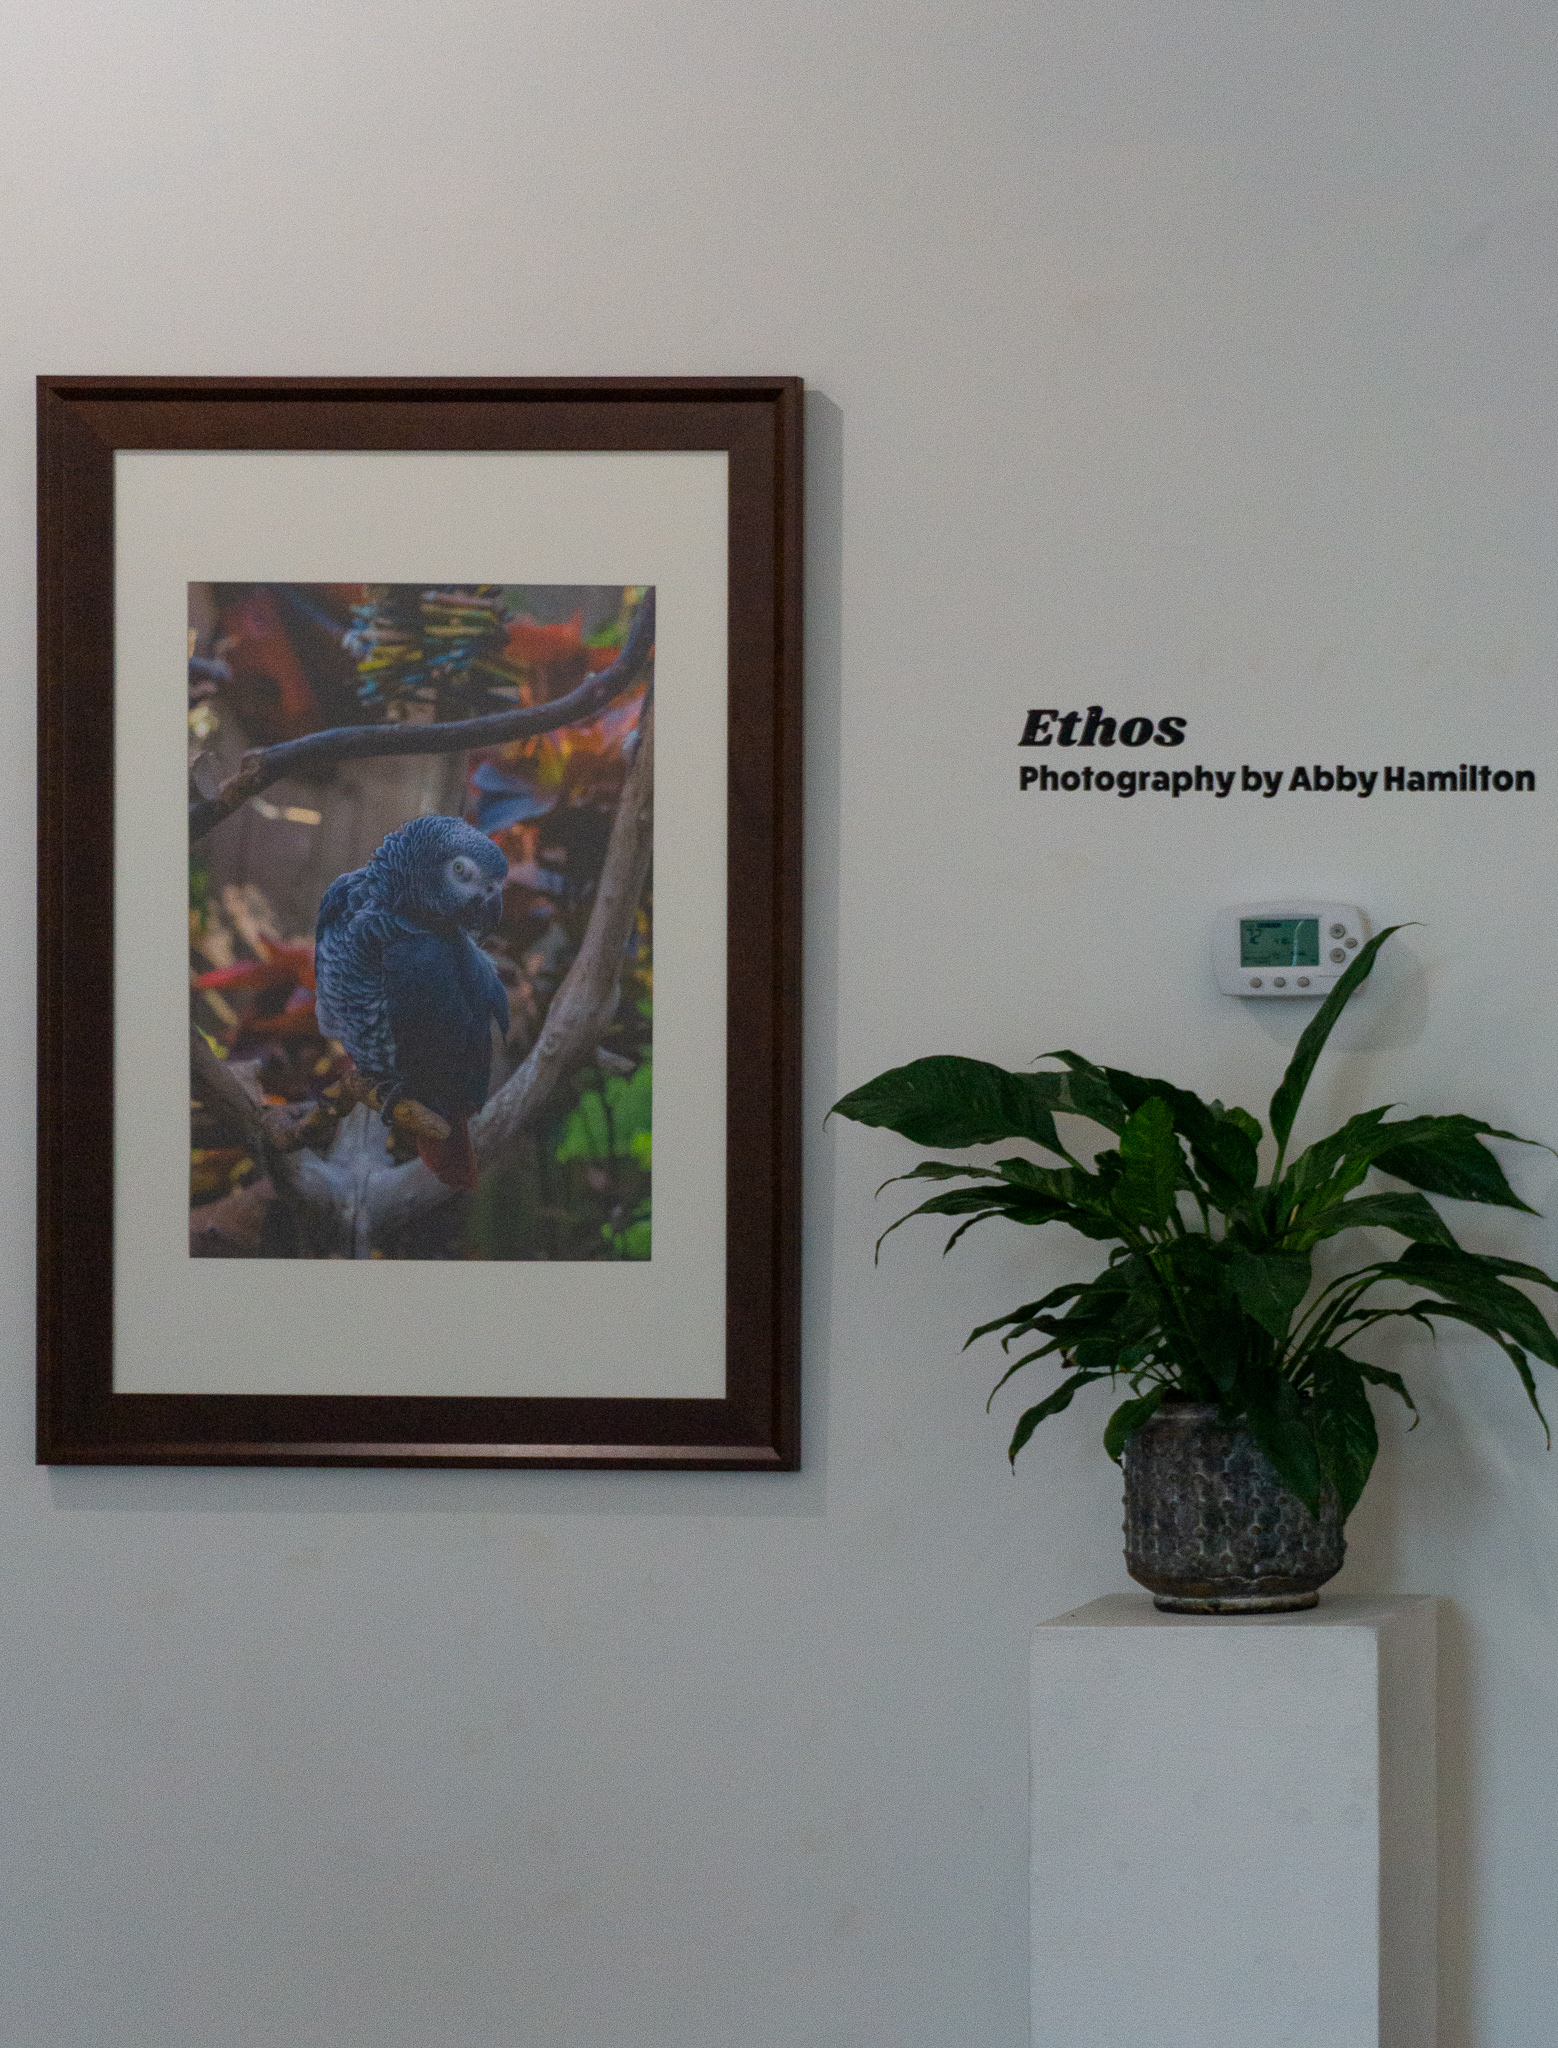 A photo of a blue bird next to the text on the wall Ethos: Photography by Abby Hamilton 